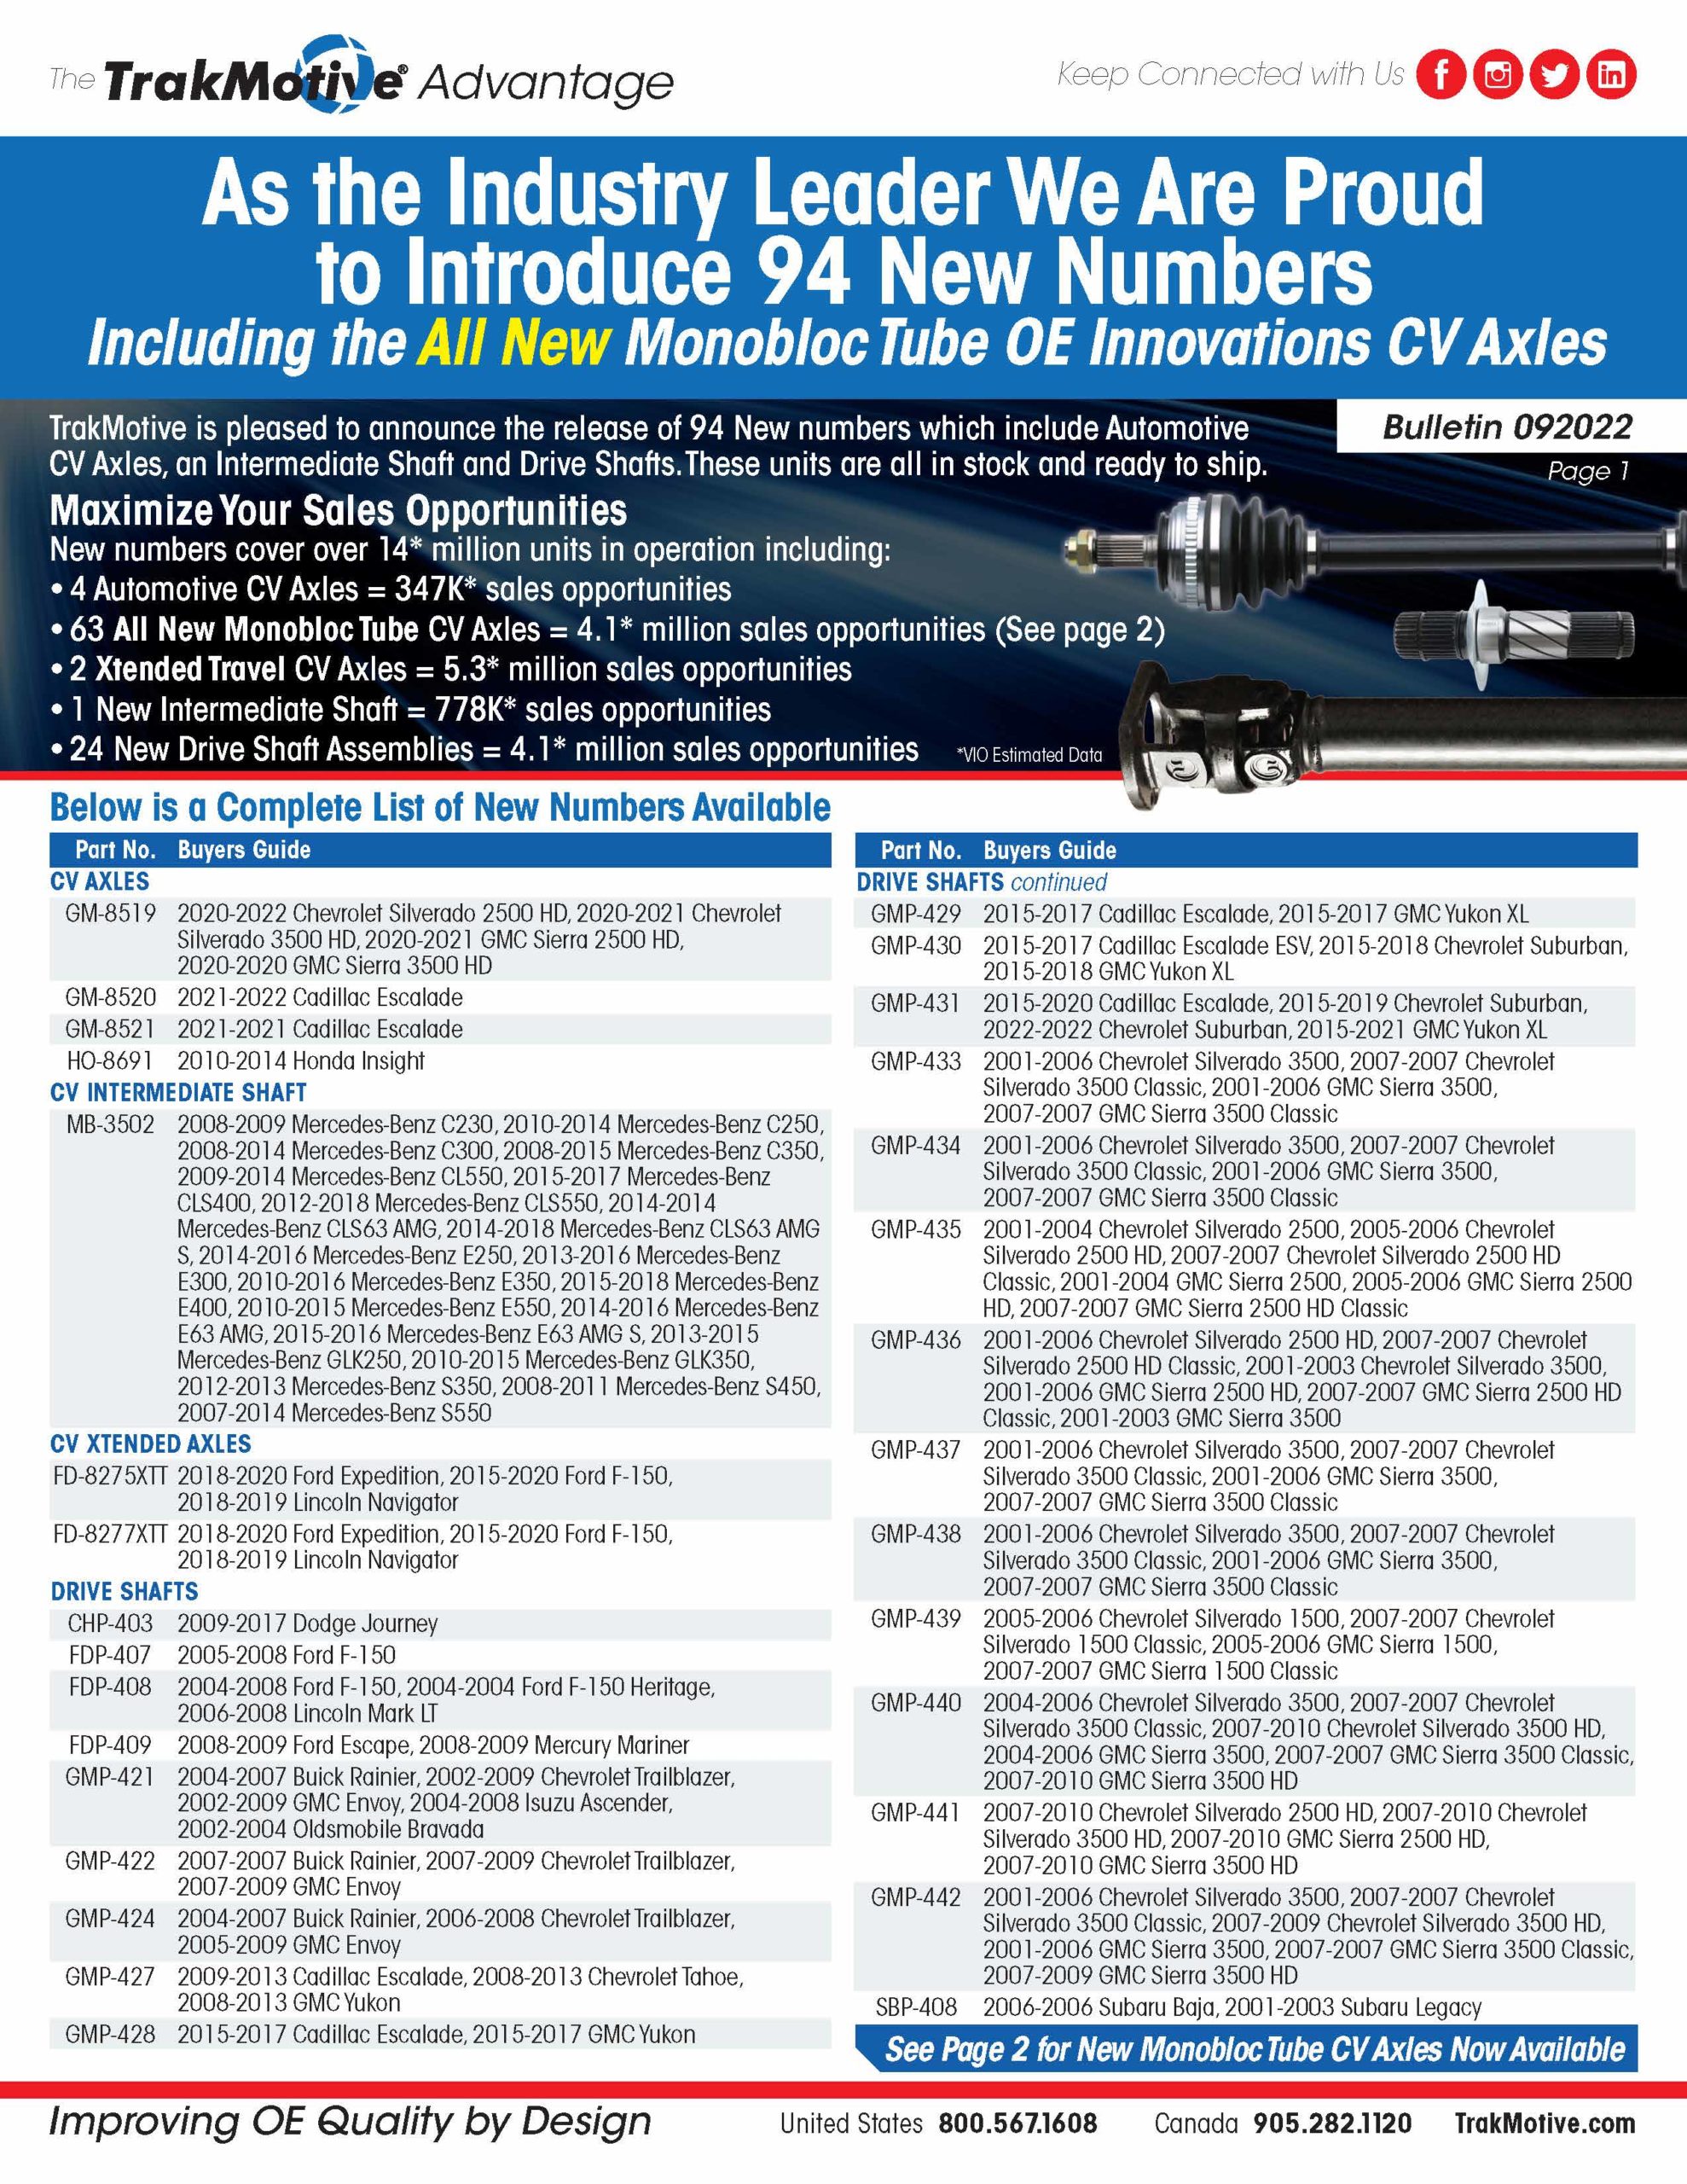 09/2022: TrakMotive Introduces 94 New Numbers Including Monobloc Tube CV Axles